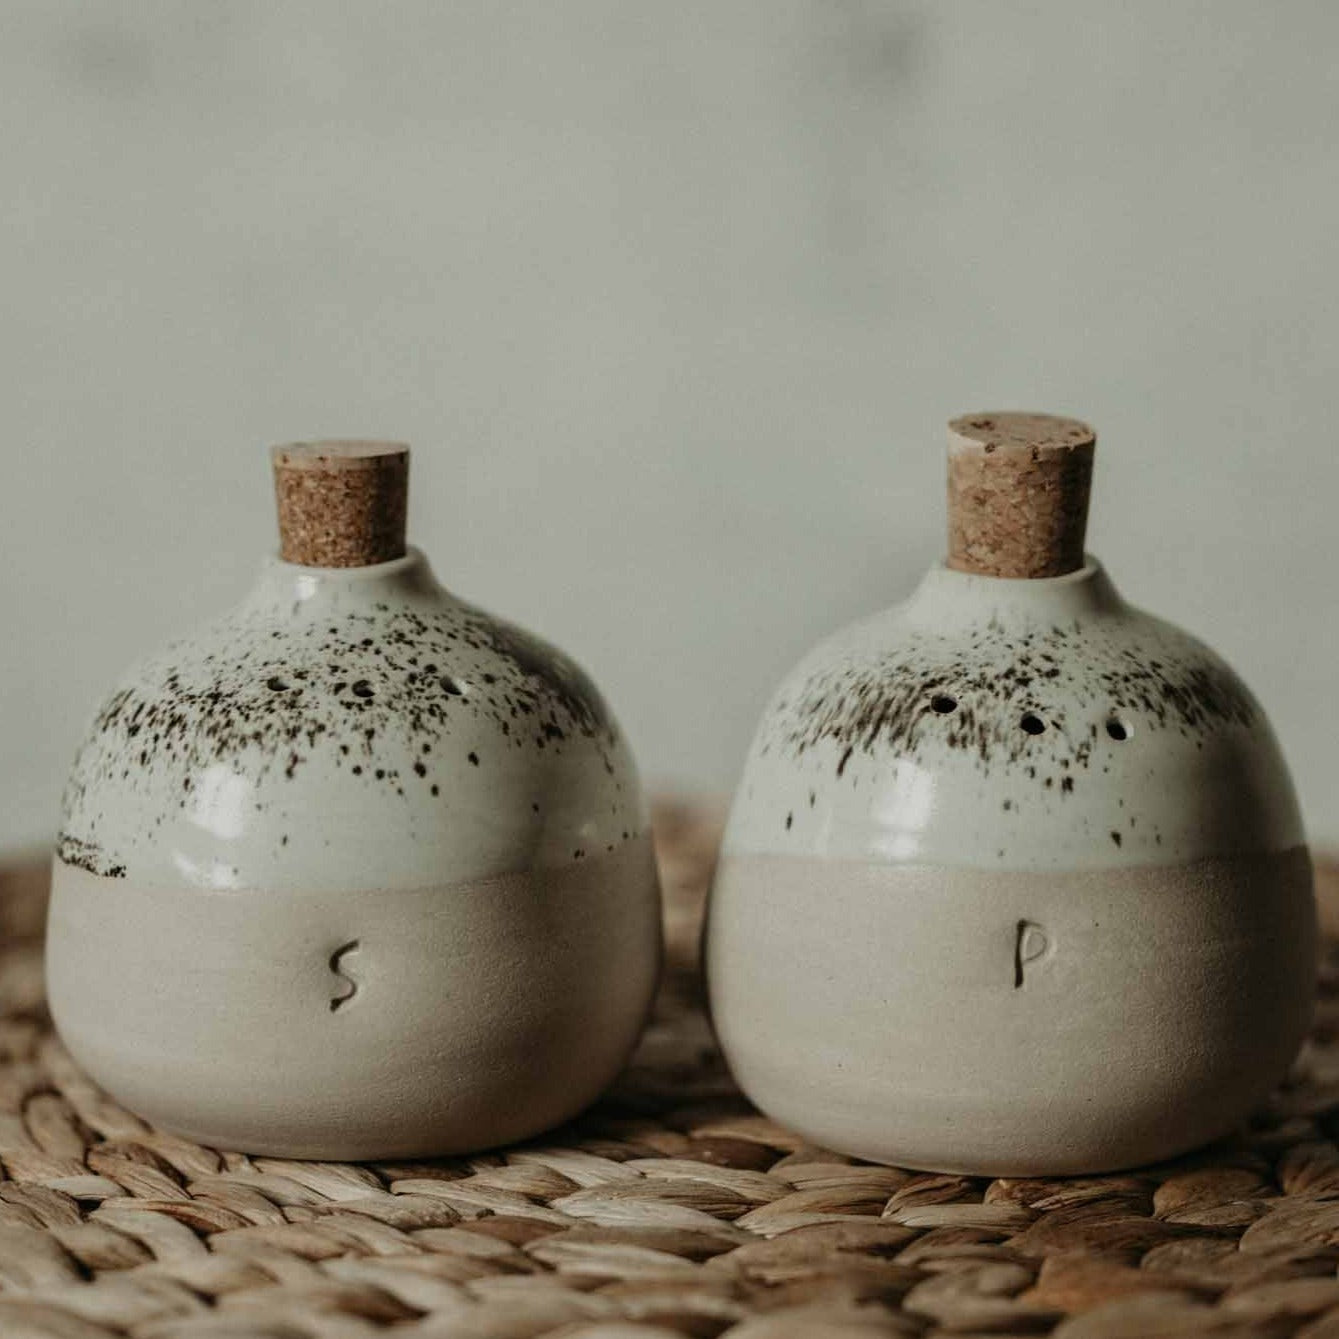 Cream-toned ceramic salt and pepper shakers, handmade with love and attention to detail.